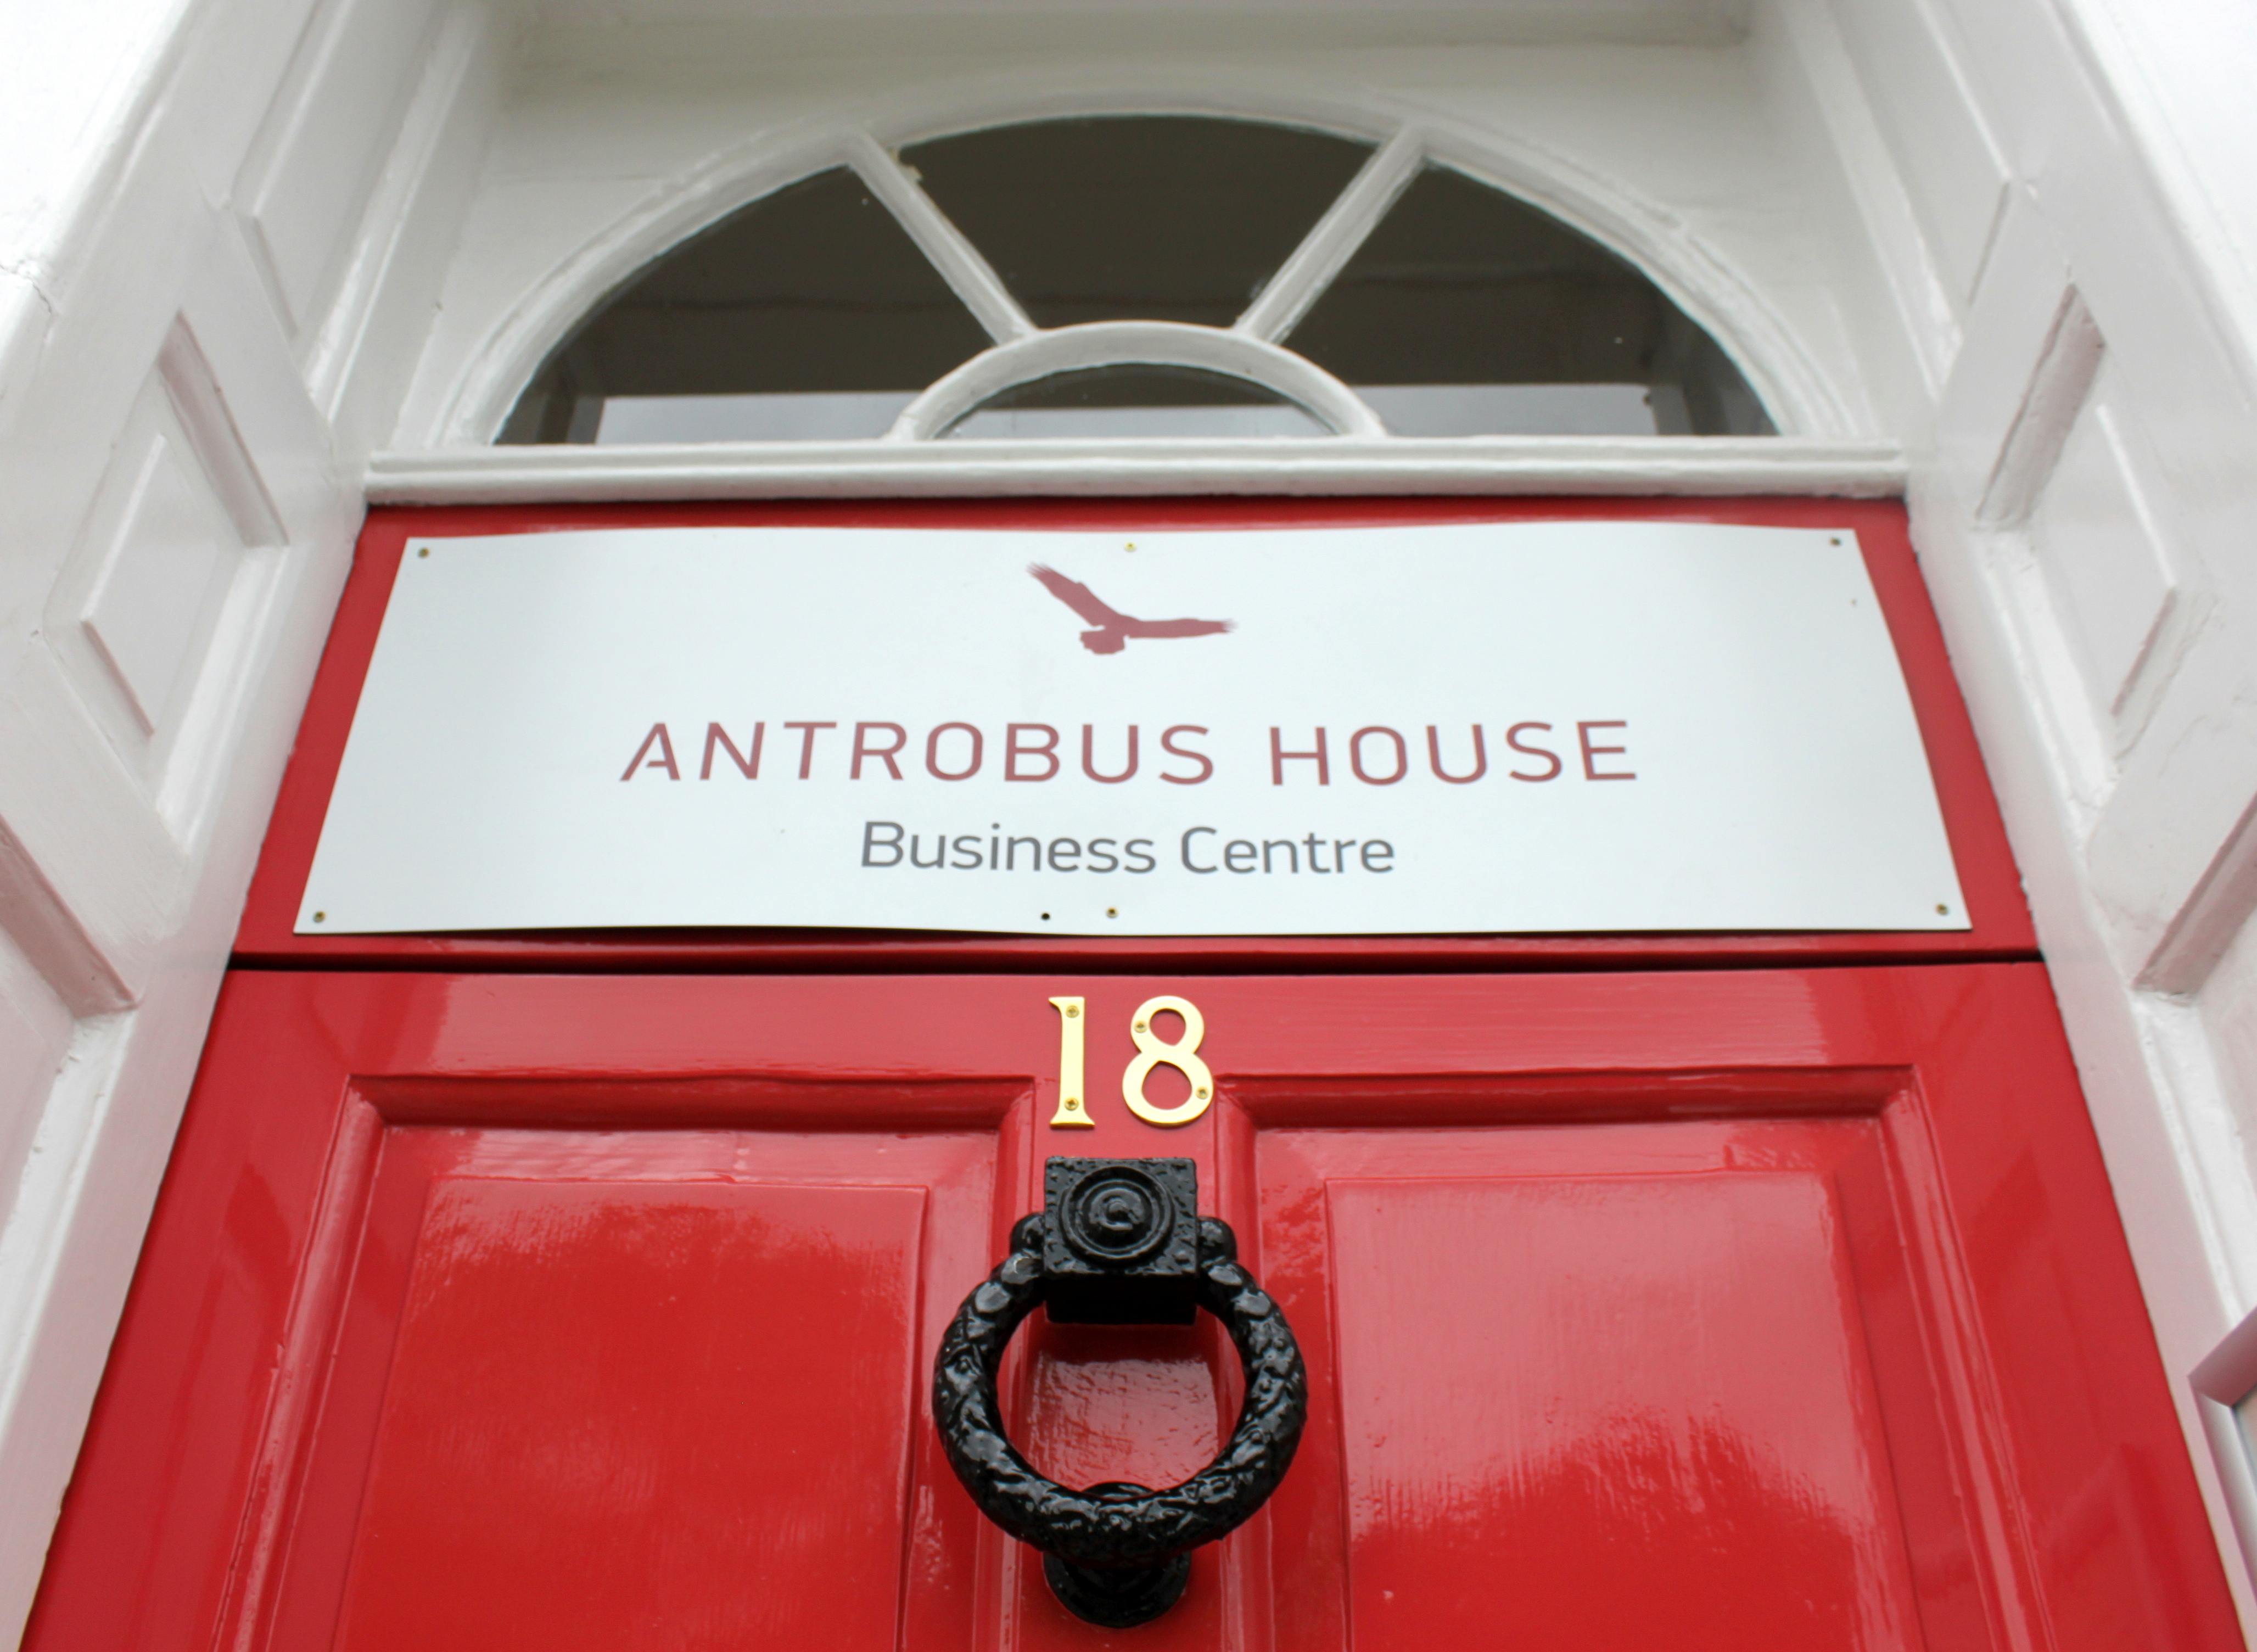 Antrobus House Registered Office Services in Petersfield